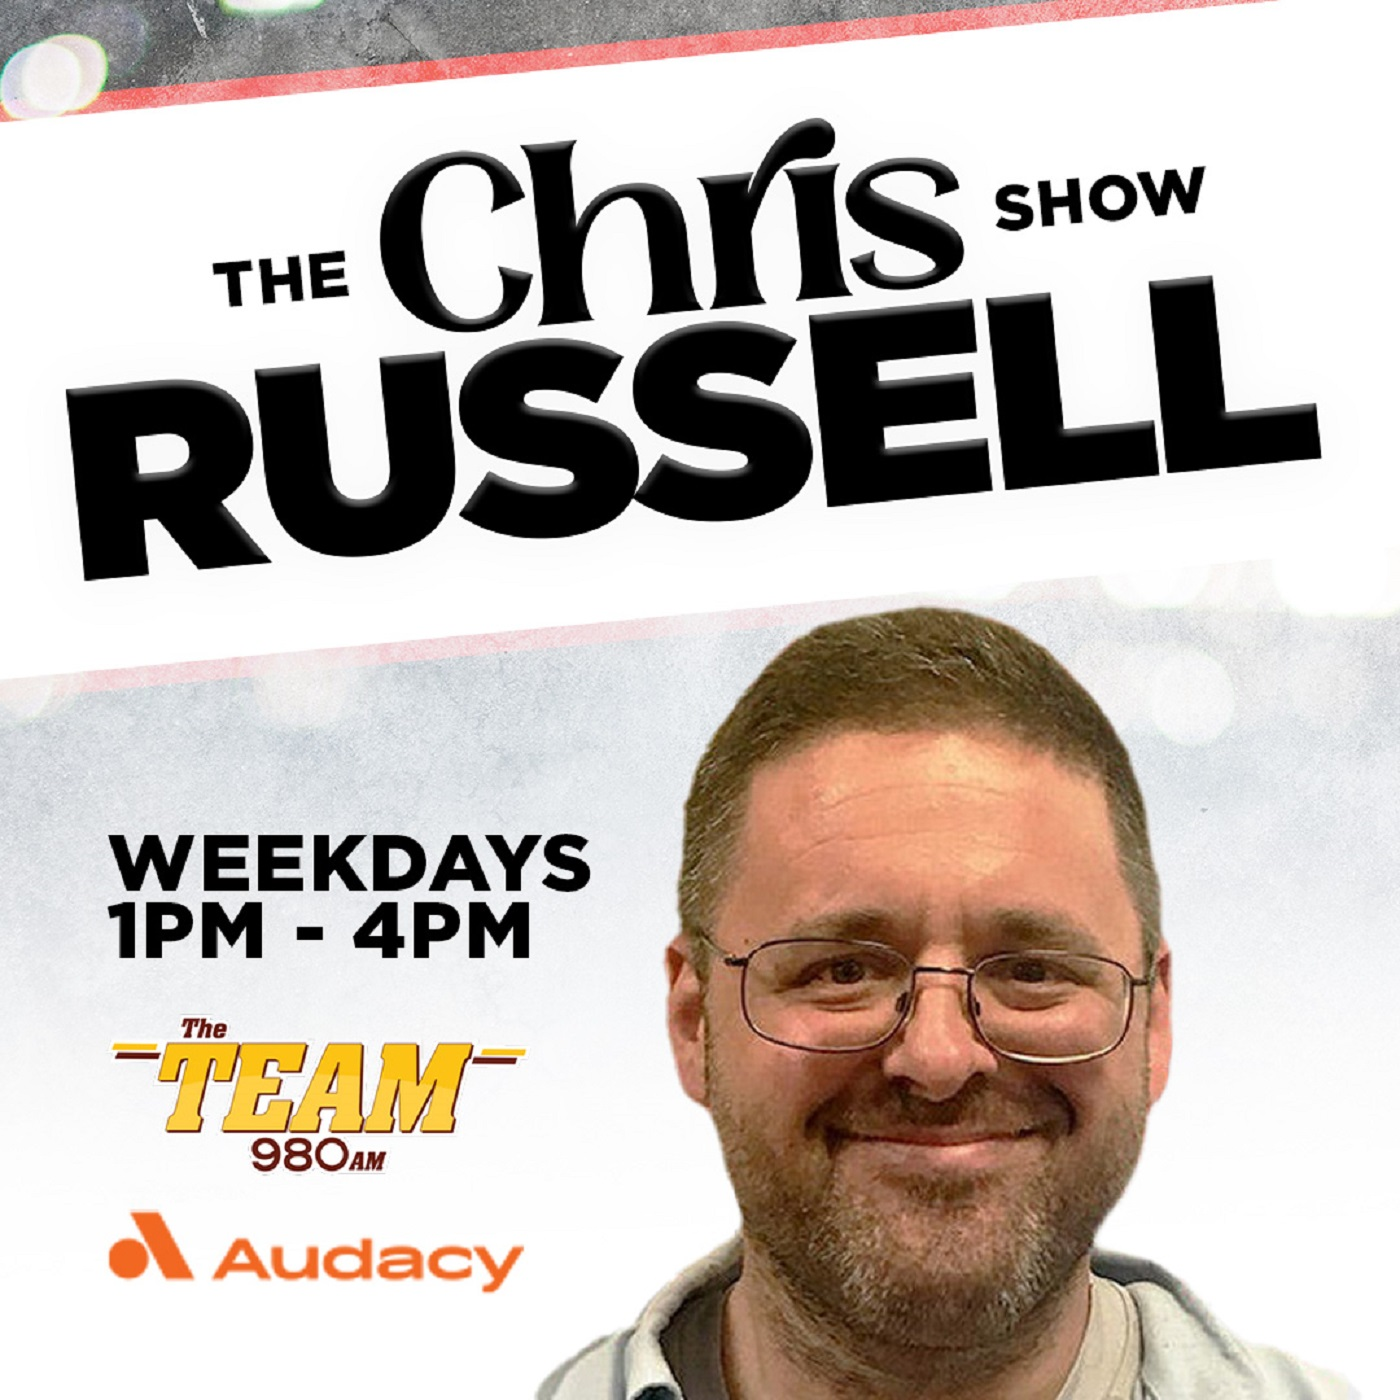 Tyler Fulgham from ESPN joins Russell on the Radio